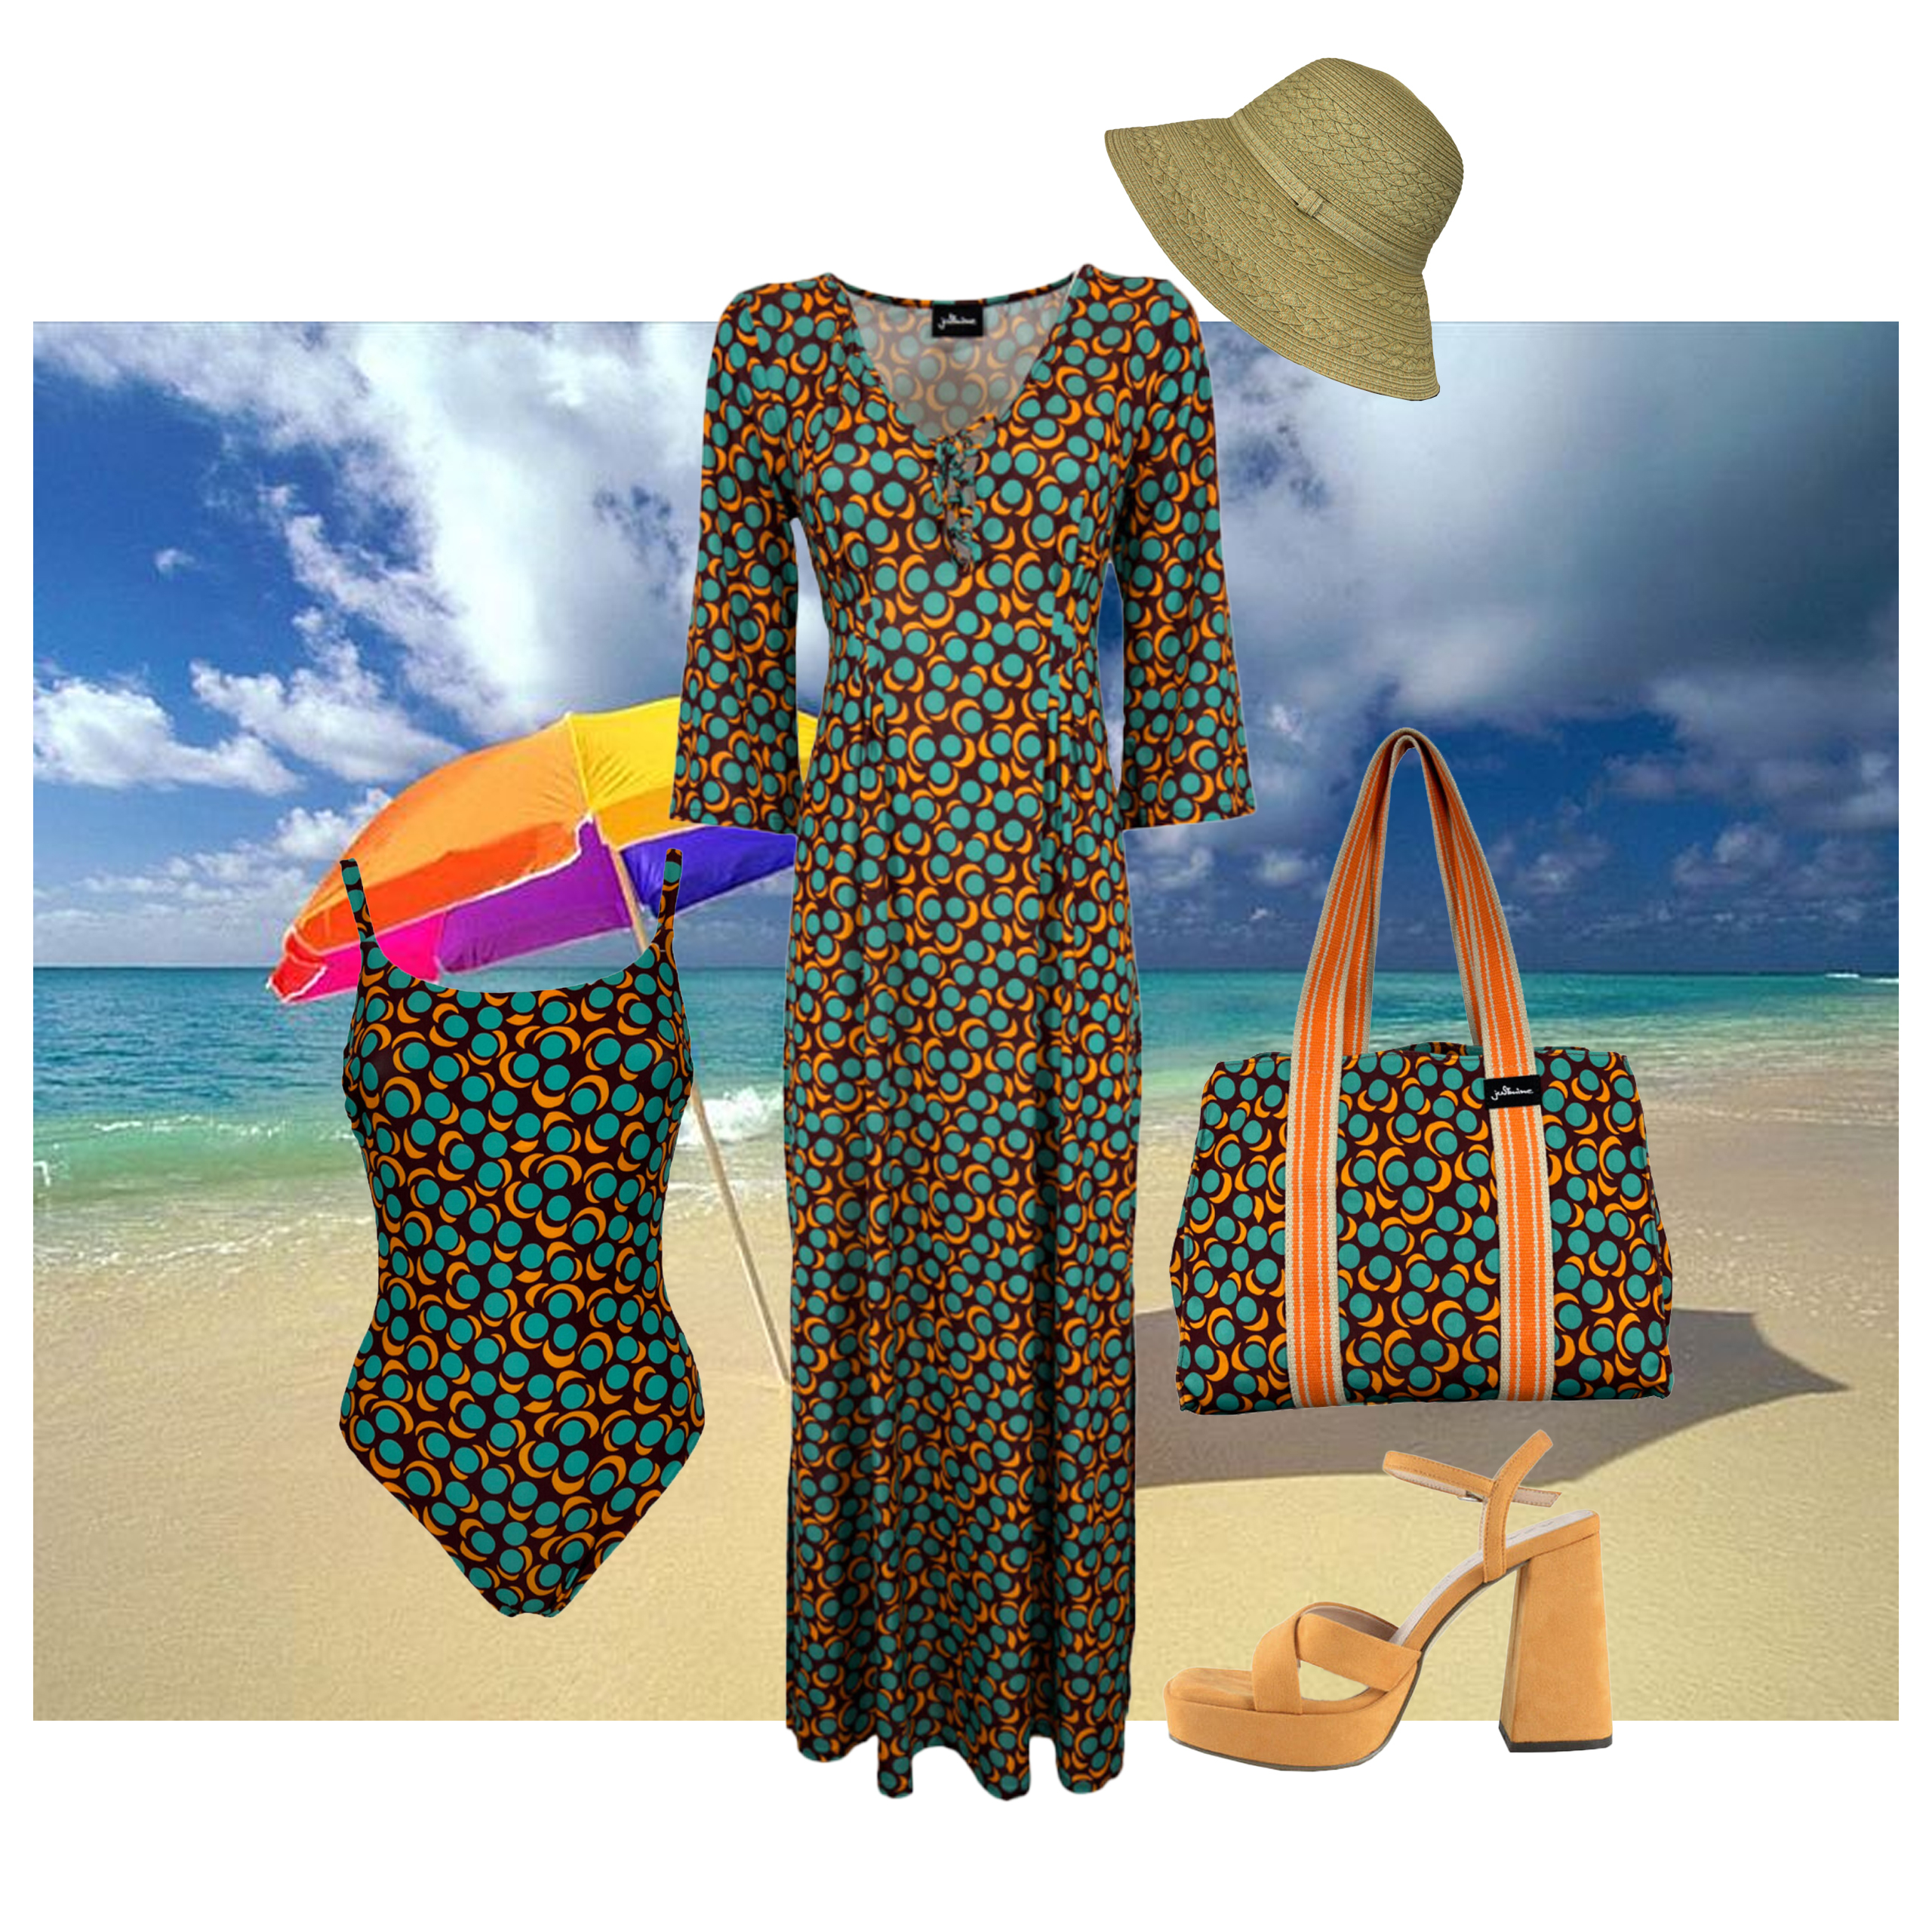 The Perfect Beach Look: Outfits and Accessories for a Summer at the Sea